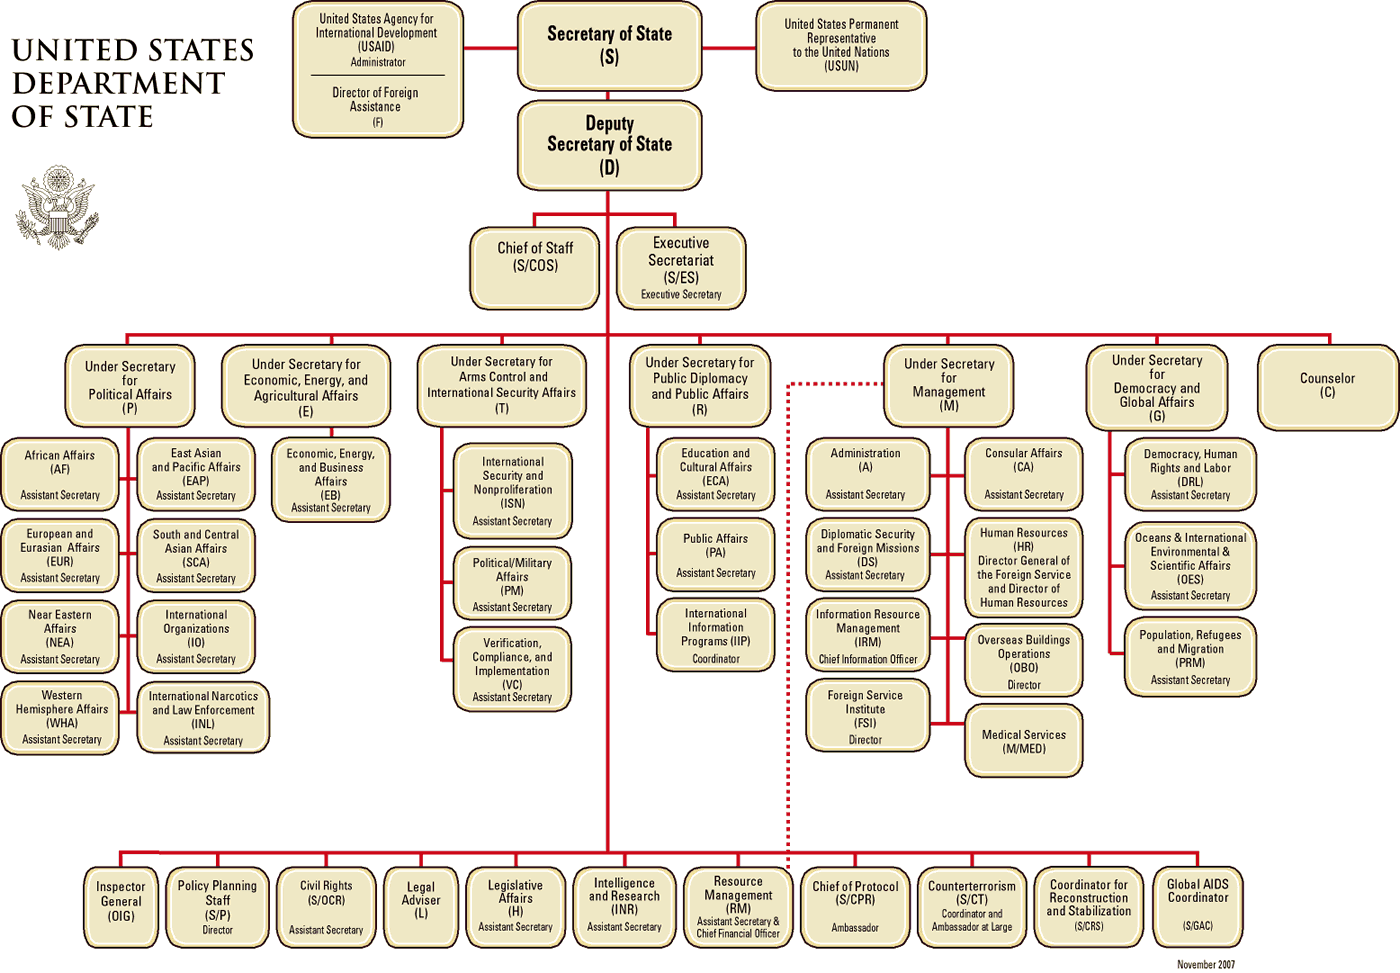 U.S. Department of State organizational chart - an example of a large entity with a more complex management structure as indicated by multiple layers at the highest, federal level. Keep in mind this chart does not show the lower layers including state and city-level staff. The more layers of management, the longer it can take for certain decisions and process improvements to be made.